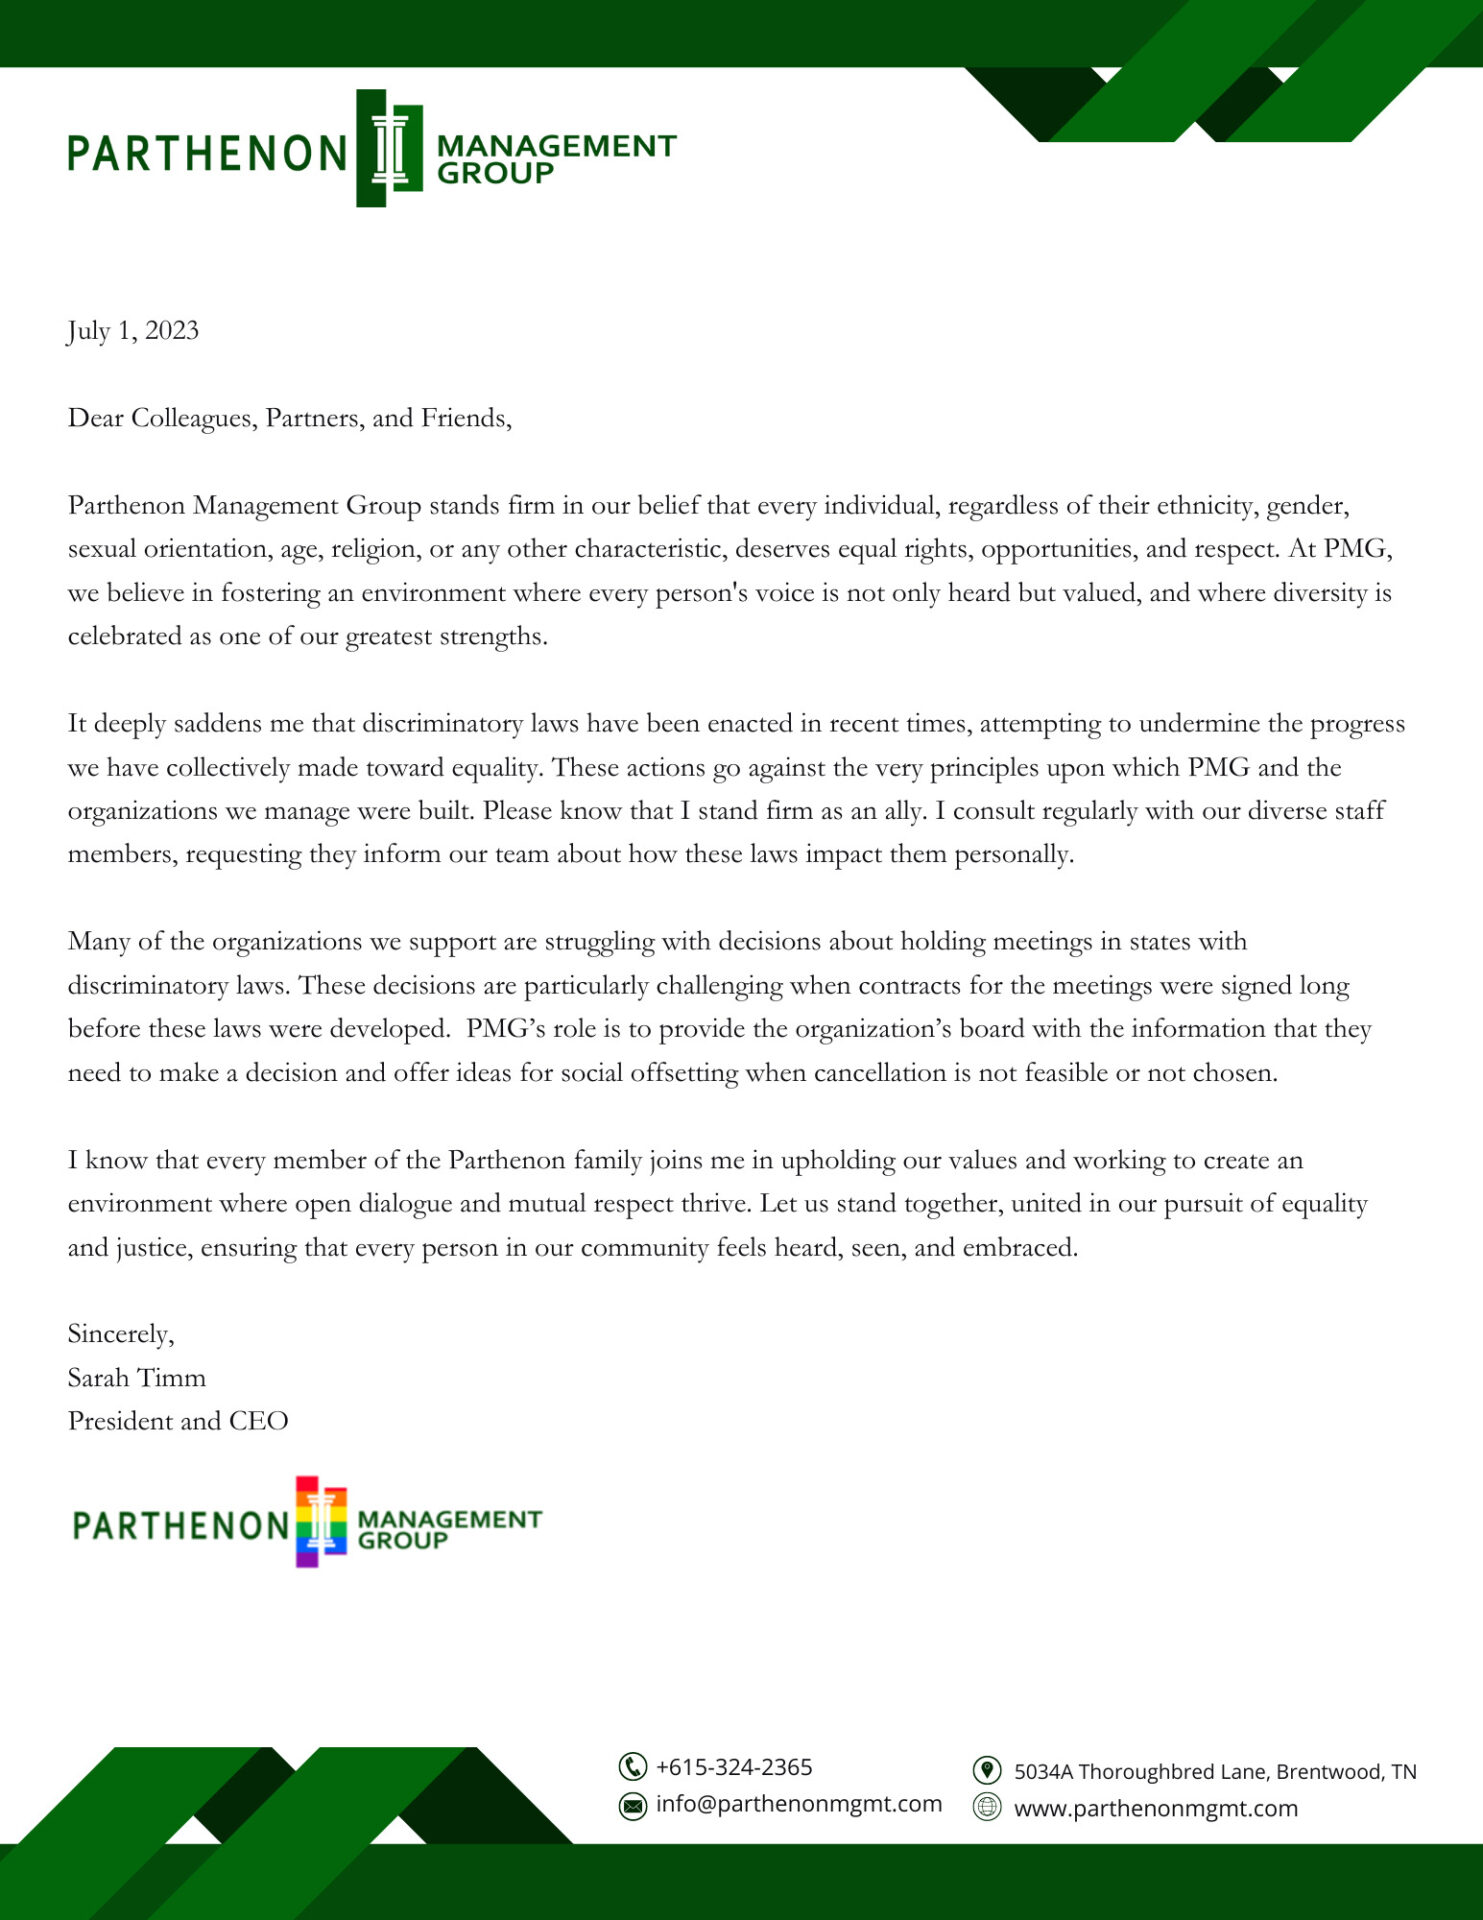 July 1, 2023</p>
<p>Dear Colleagues, Partners, and Friends,<br />
Parthenon Management Group stands firm in our belief that every individual, regardless of their ethnicity, gender, sexual orientation, age, religion, or any other characteristic, deserves equal rights, opportunities, and respect. At PMG, we believe in fostering an environment where every person's voice is not only heard but valued, and where diversity is celebrated as one of our greatest strengths.<br />
It deeply saddens me that discriminatory laws have been enacted in recent times, attempting to undermine the progress we have collectively made toward equality. These actions go against the very principles upon which PMG and the organizations we manage were built. Please know that I stand firm as an ally. I consult regularly with our diverse staff members, requesting they inform our team about how these laws impact them personally.<br />
Many of the organizations we support are struggling with decisions about holding meetings in states with discriminatory laws. These decisions are particularly challenging when contracts for the meetings were signed long before these laws were developed.  PMG’s role is to provide the organization’s board with the information that they need to make a decision and offer ideas for social offsetting when cancellation is not feasible or not chosen.<br />
I know that every member of the Parthenon family joins me in upholding our values and working to create an environment where open dialogue and mutual respect thrive. Let us stand together, united in our pursuit of equality and justice, ensuring that every person in our community feels heard, seen, and embraced.<br />
Sincerely,<br />
Sarah Timm<br />
President and CEO<br />
